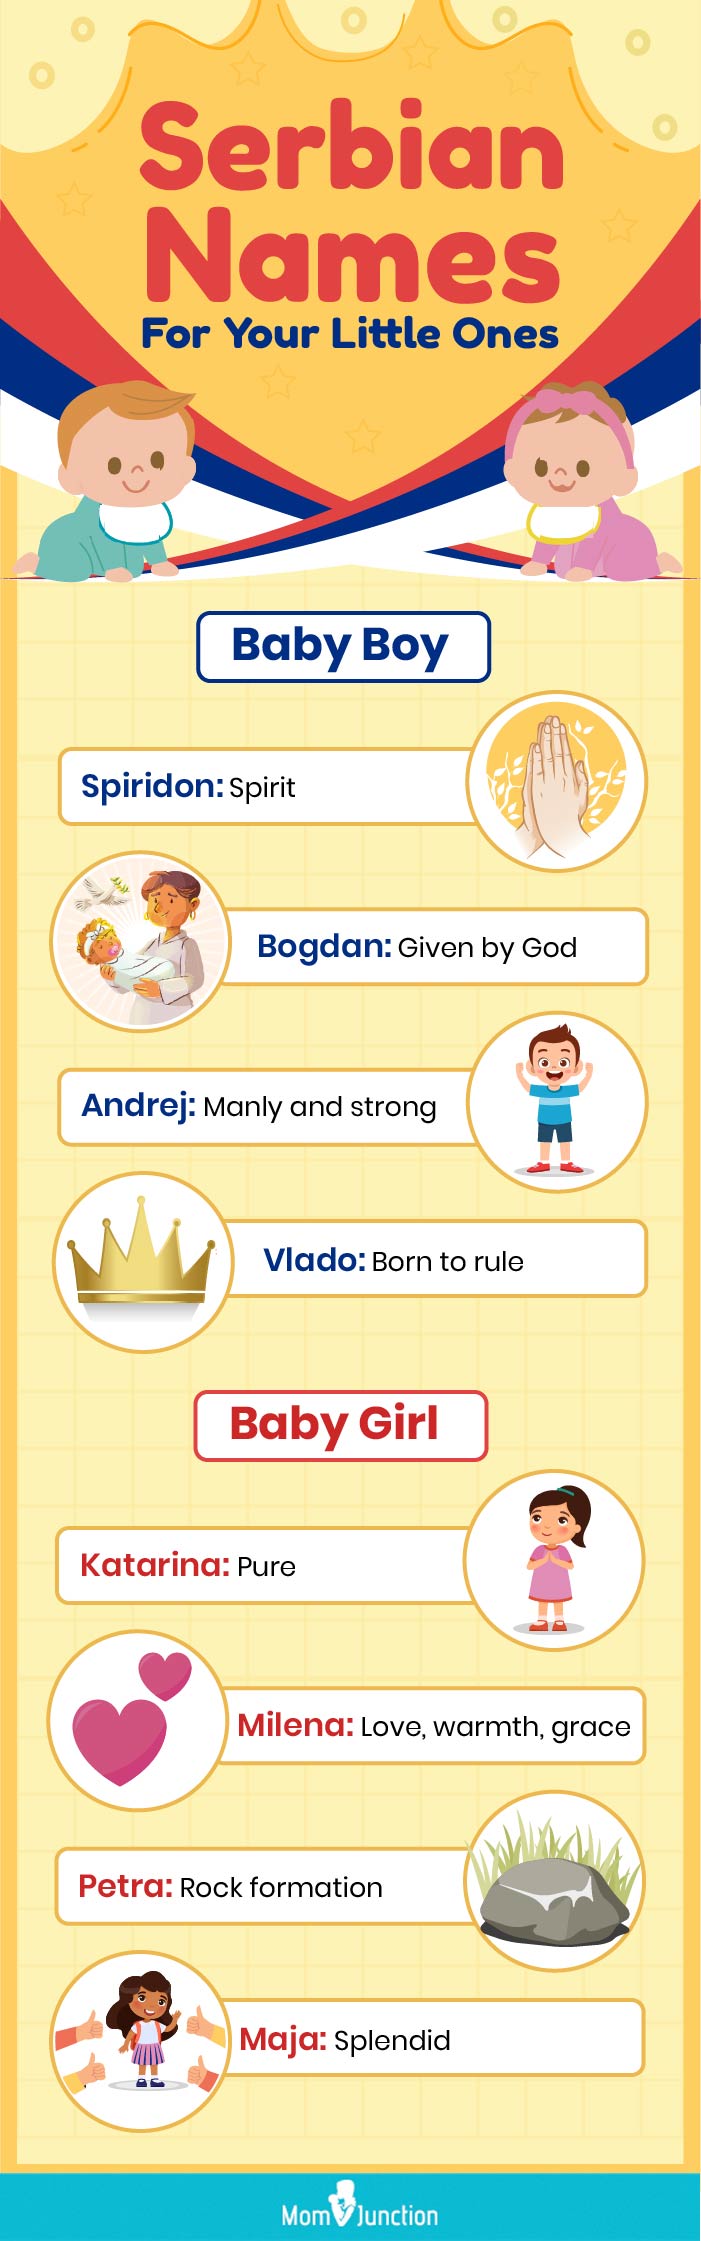 serbian names for your little ones (infographic)